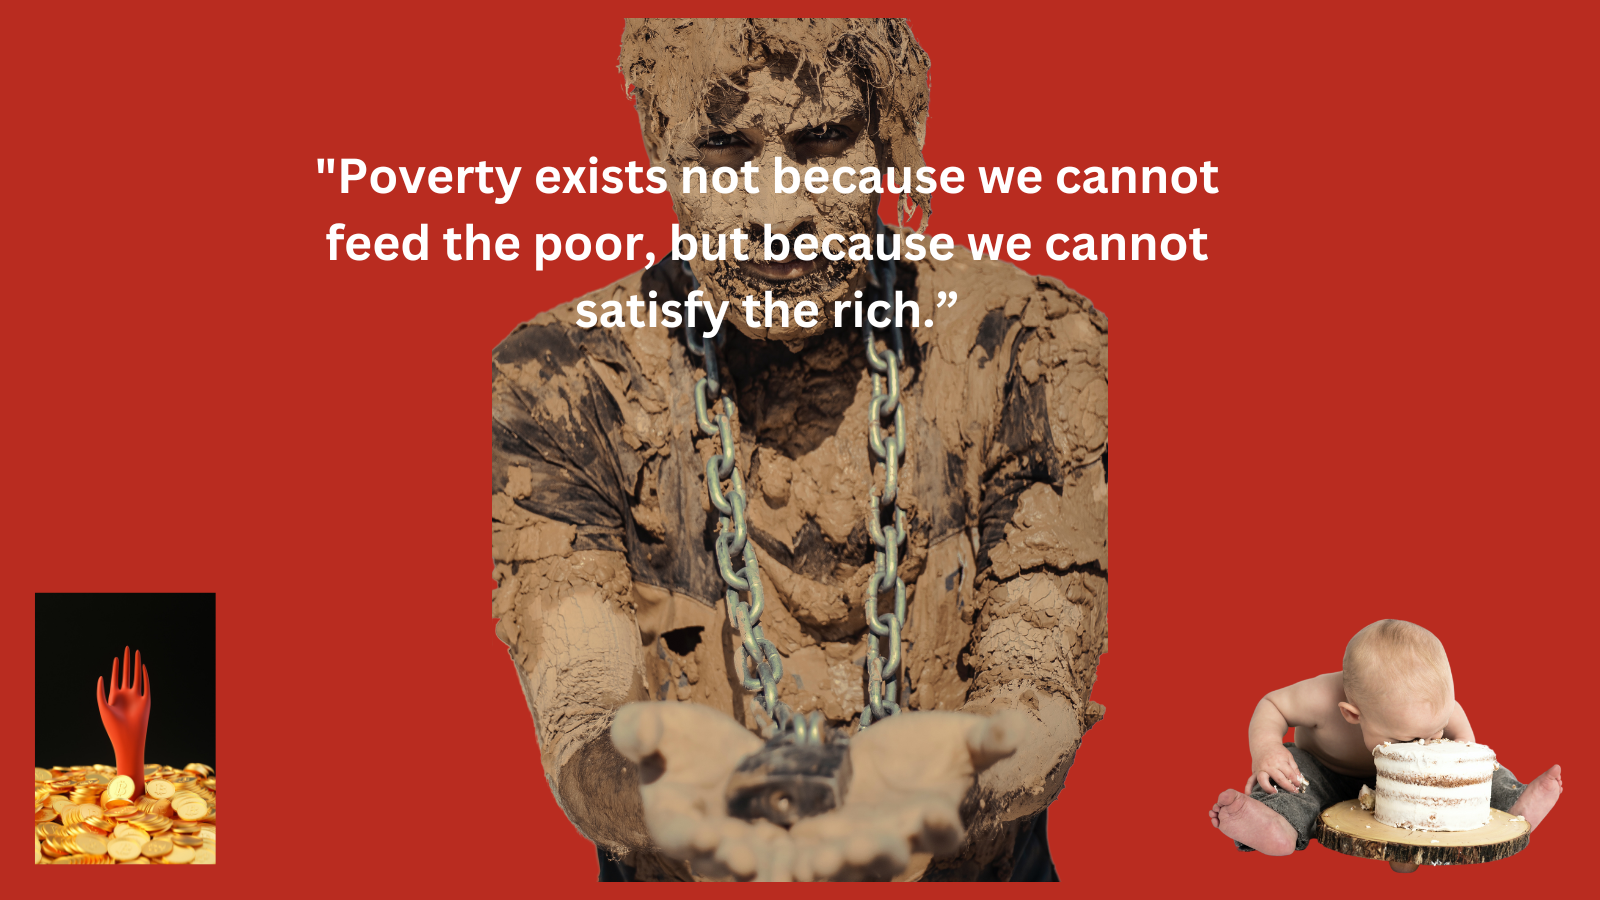 Poverty exists not because we cannot feed the poor, but because we cannot satisfy the rich.”.png